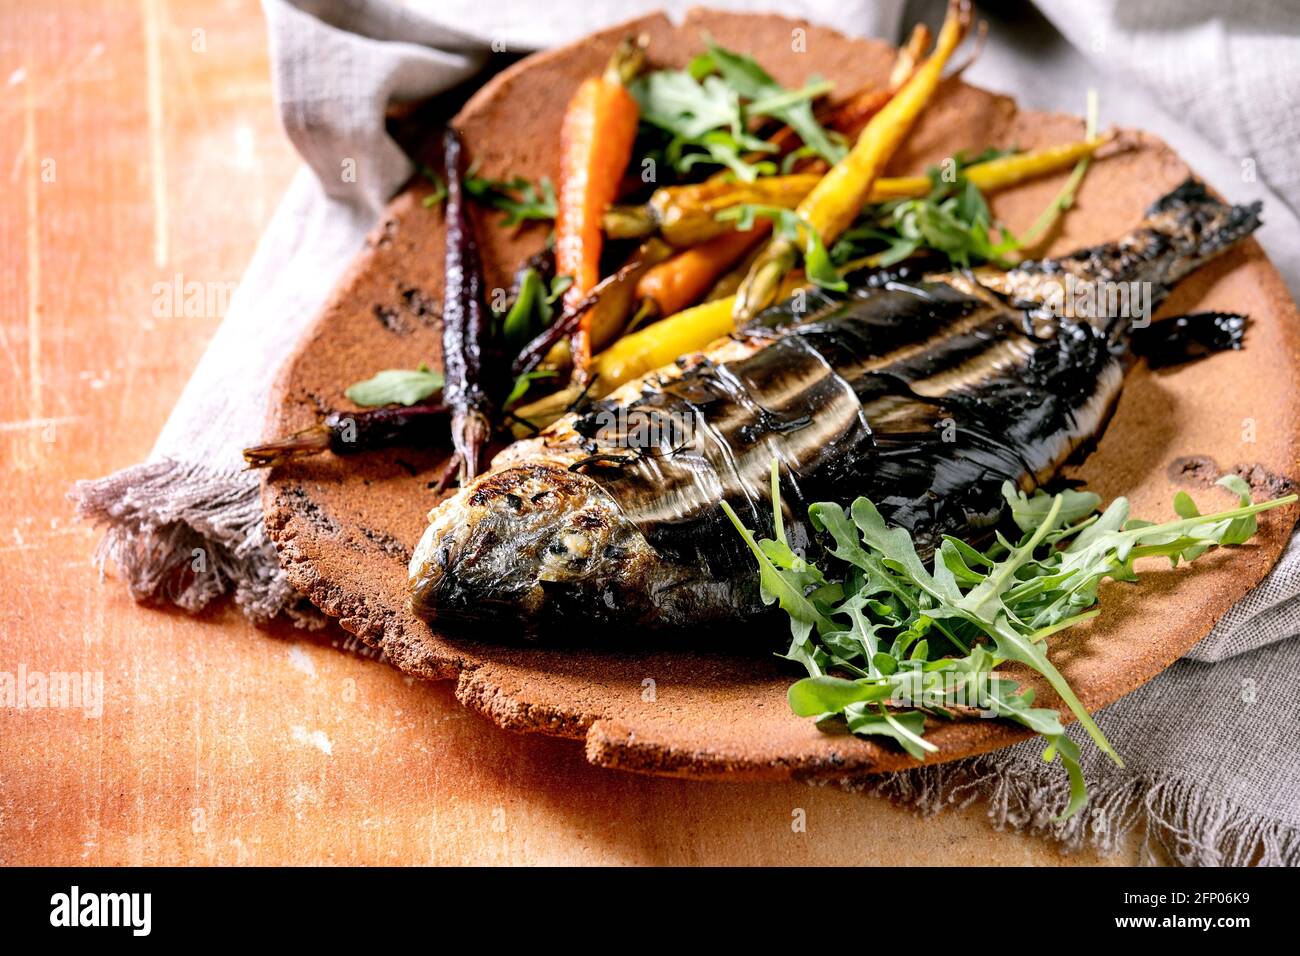 Grilled cooked fresh gutted sea bream or dorado fish on ceramic plate wrapped in bamboo leaves served with herbs, colorful carrots, white napkin over Stock Photo